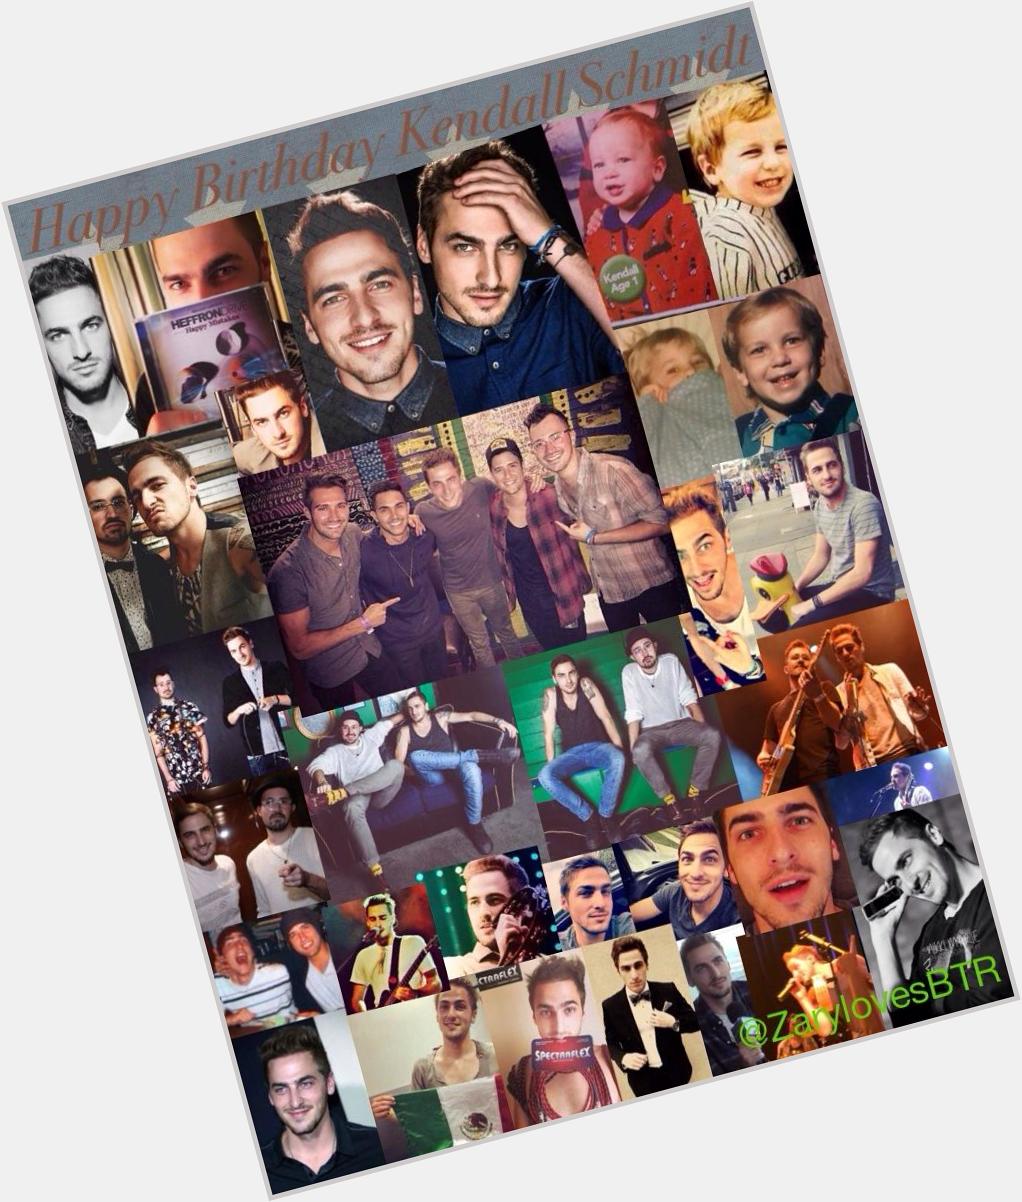 Happy 24th Birthday Kendall Schmidt! I Love You So Much! God Bless You! Babe Have An Amazing Day!      